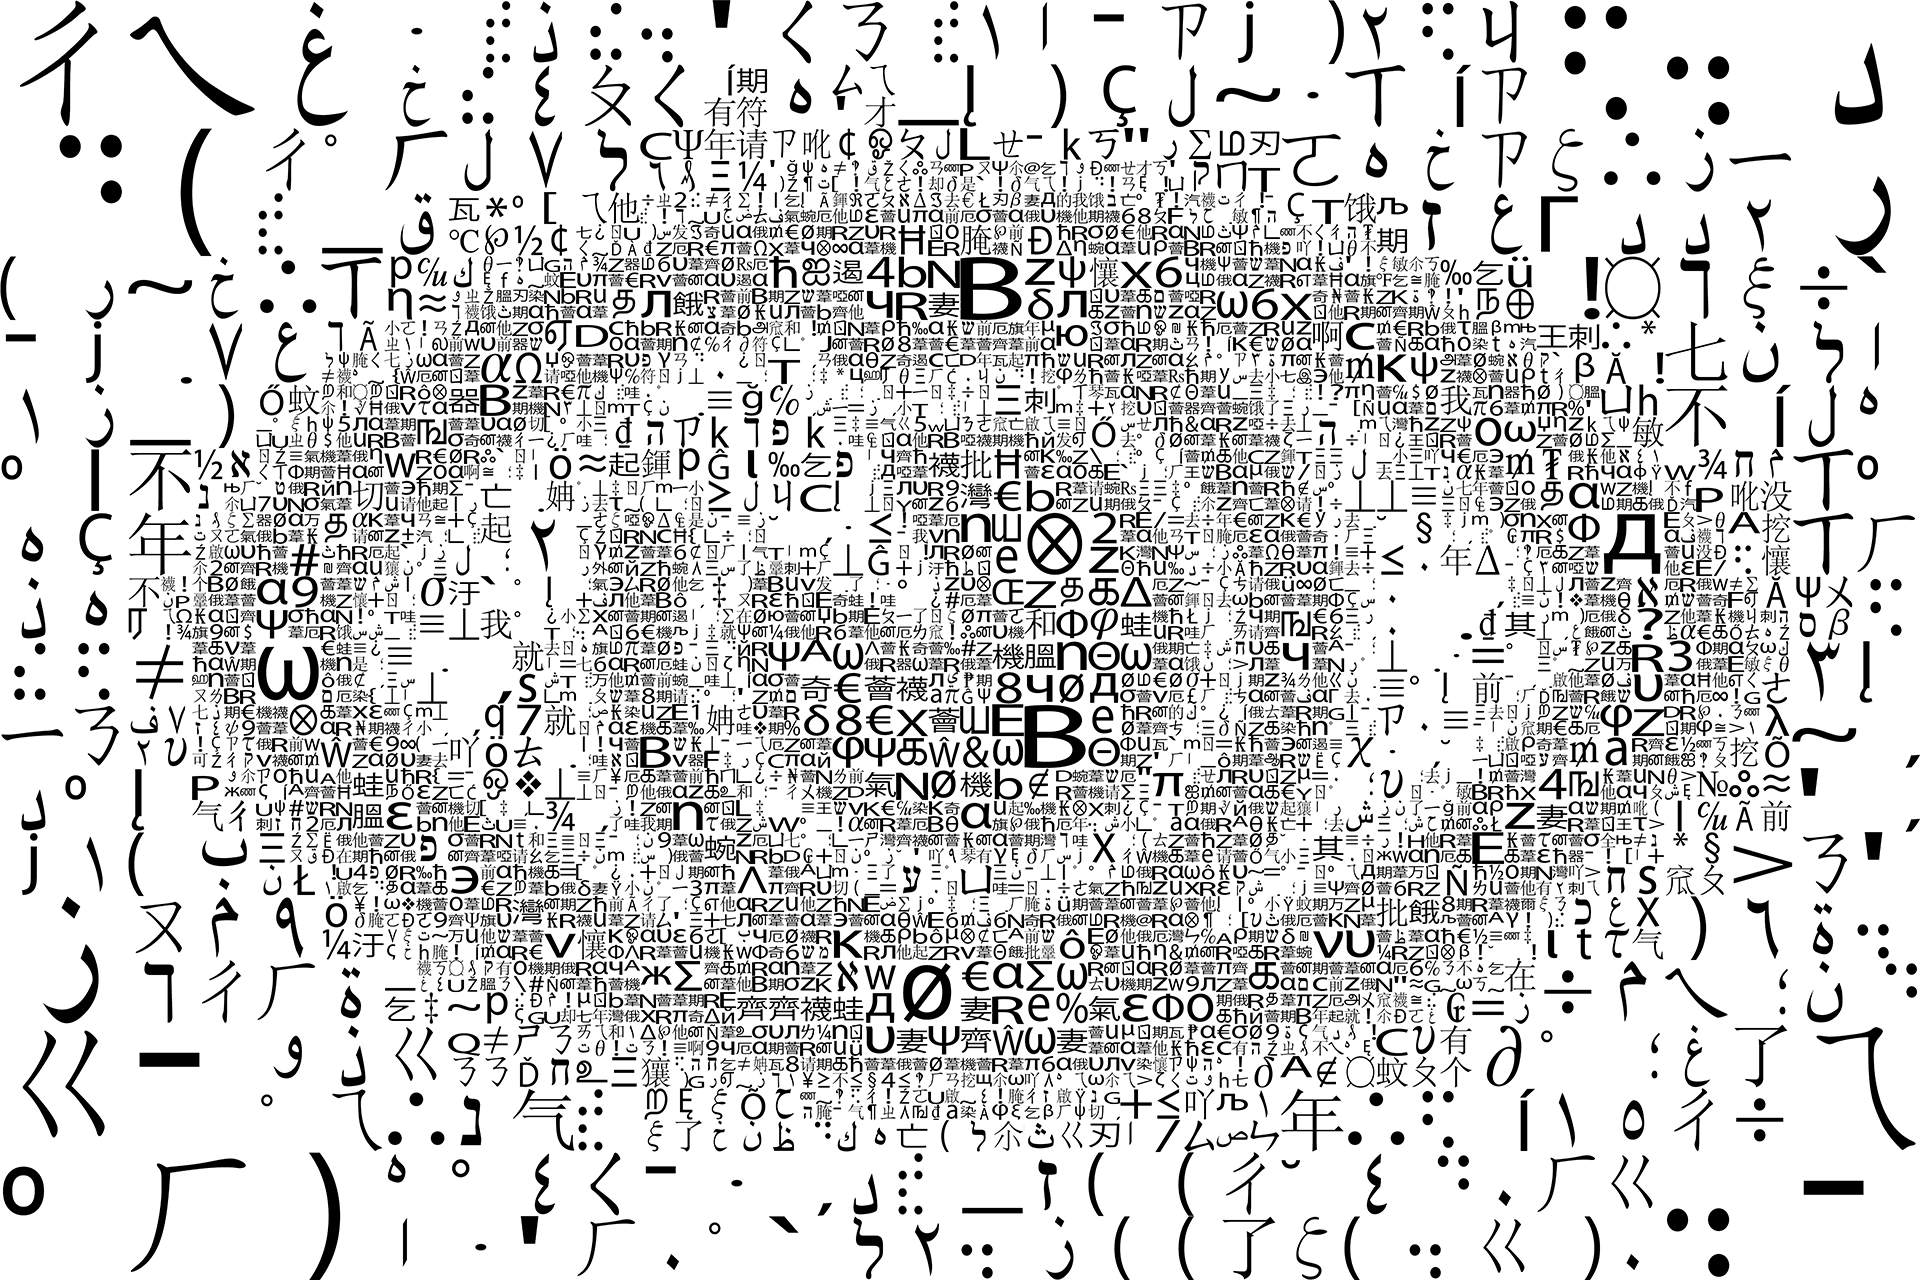 photo mosaic This monochrome eye was created using approximately 500 symbols and alphanumeric characters